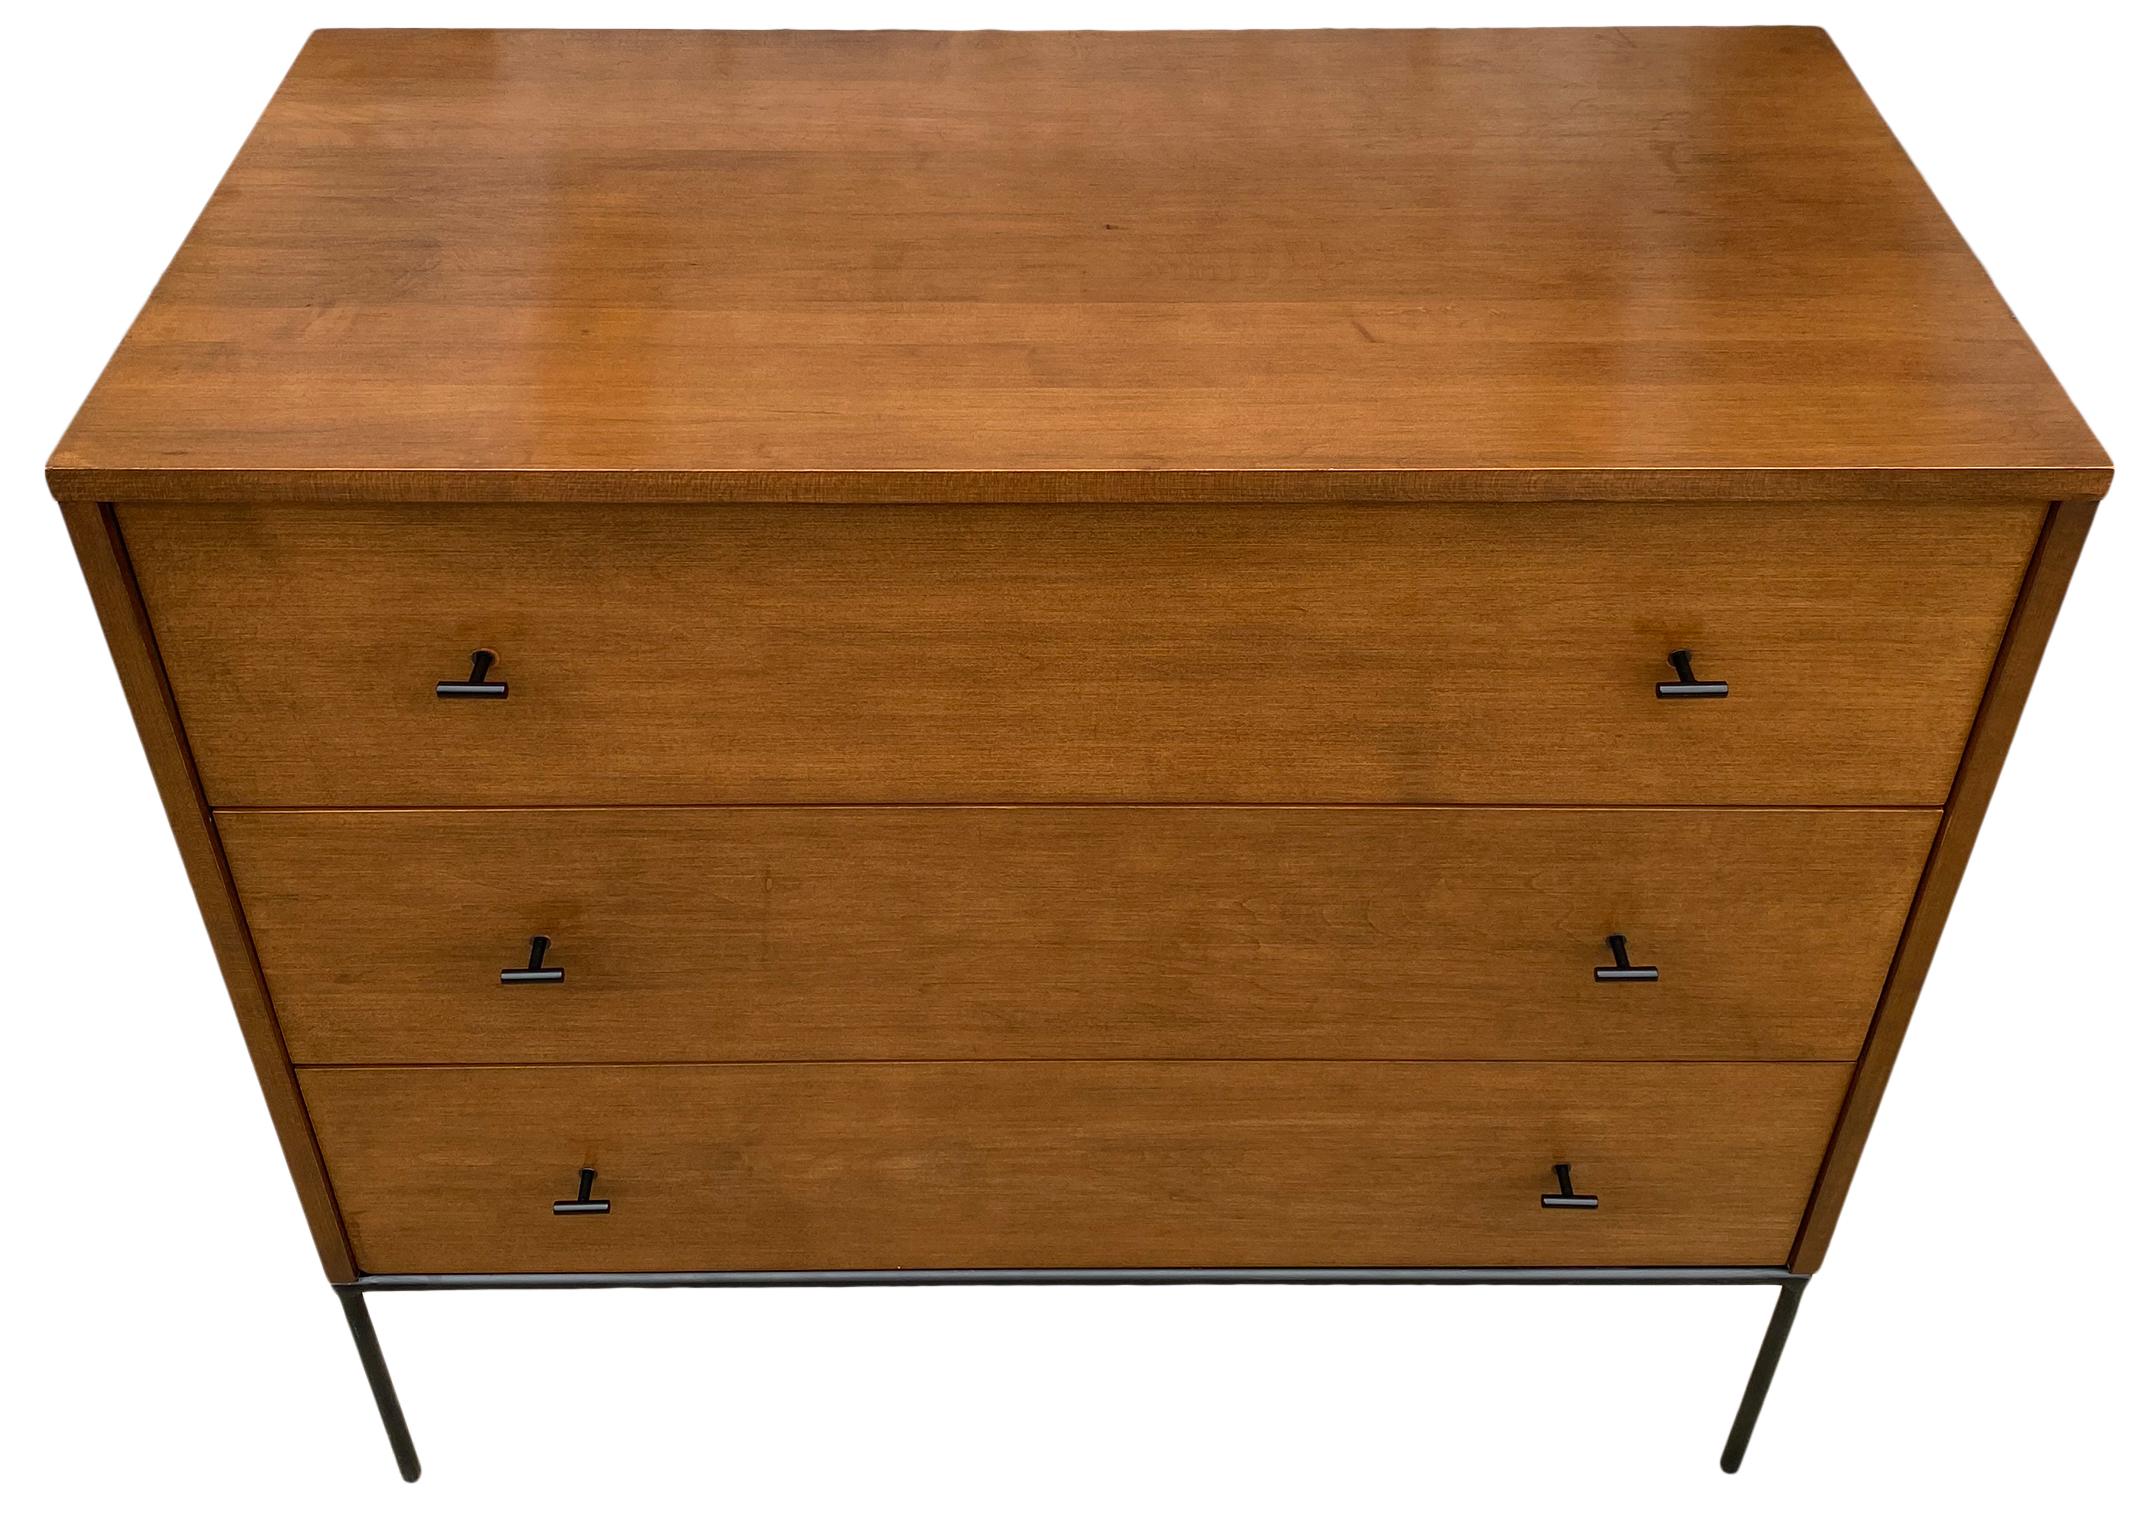 Vintage midcentury Paul McCobb 3-drawer dresser Planner Group #1508. Beautiful dresser by Paul McCobb circa 1950s Planner Group, 3 drawer, solid maple, Walnut finish, black T pulls, black iron base. Clean inside and out all drawers slide smooth.